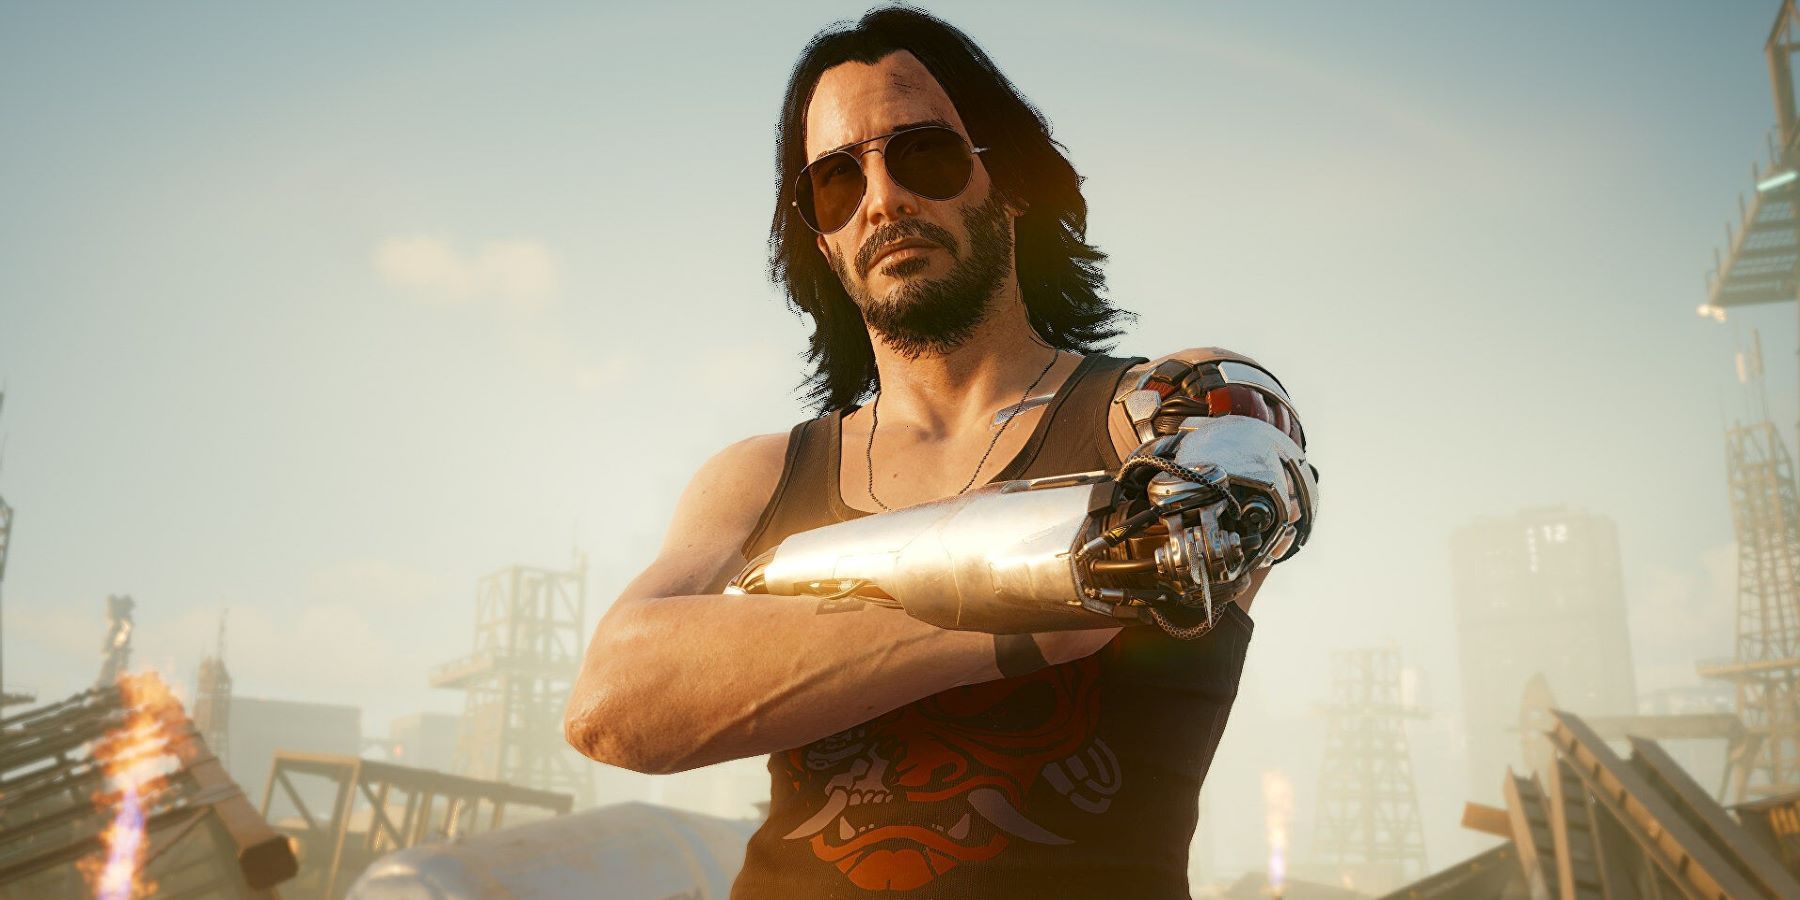 Cyberpunk 2077 Has Come a Long Way, But Has It Been Redeemed Yet?